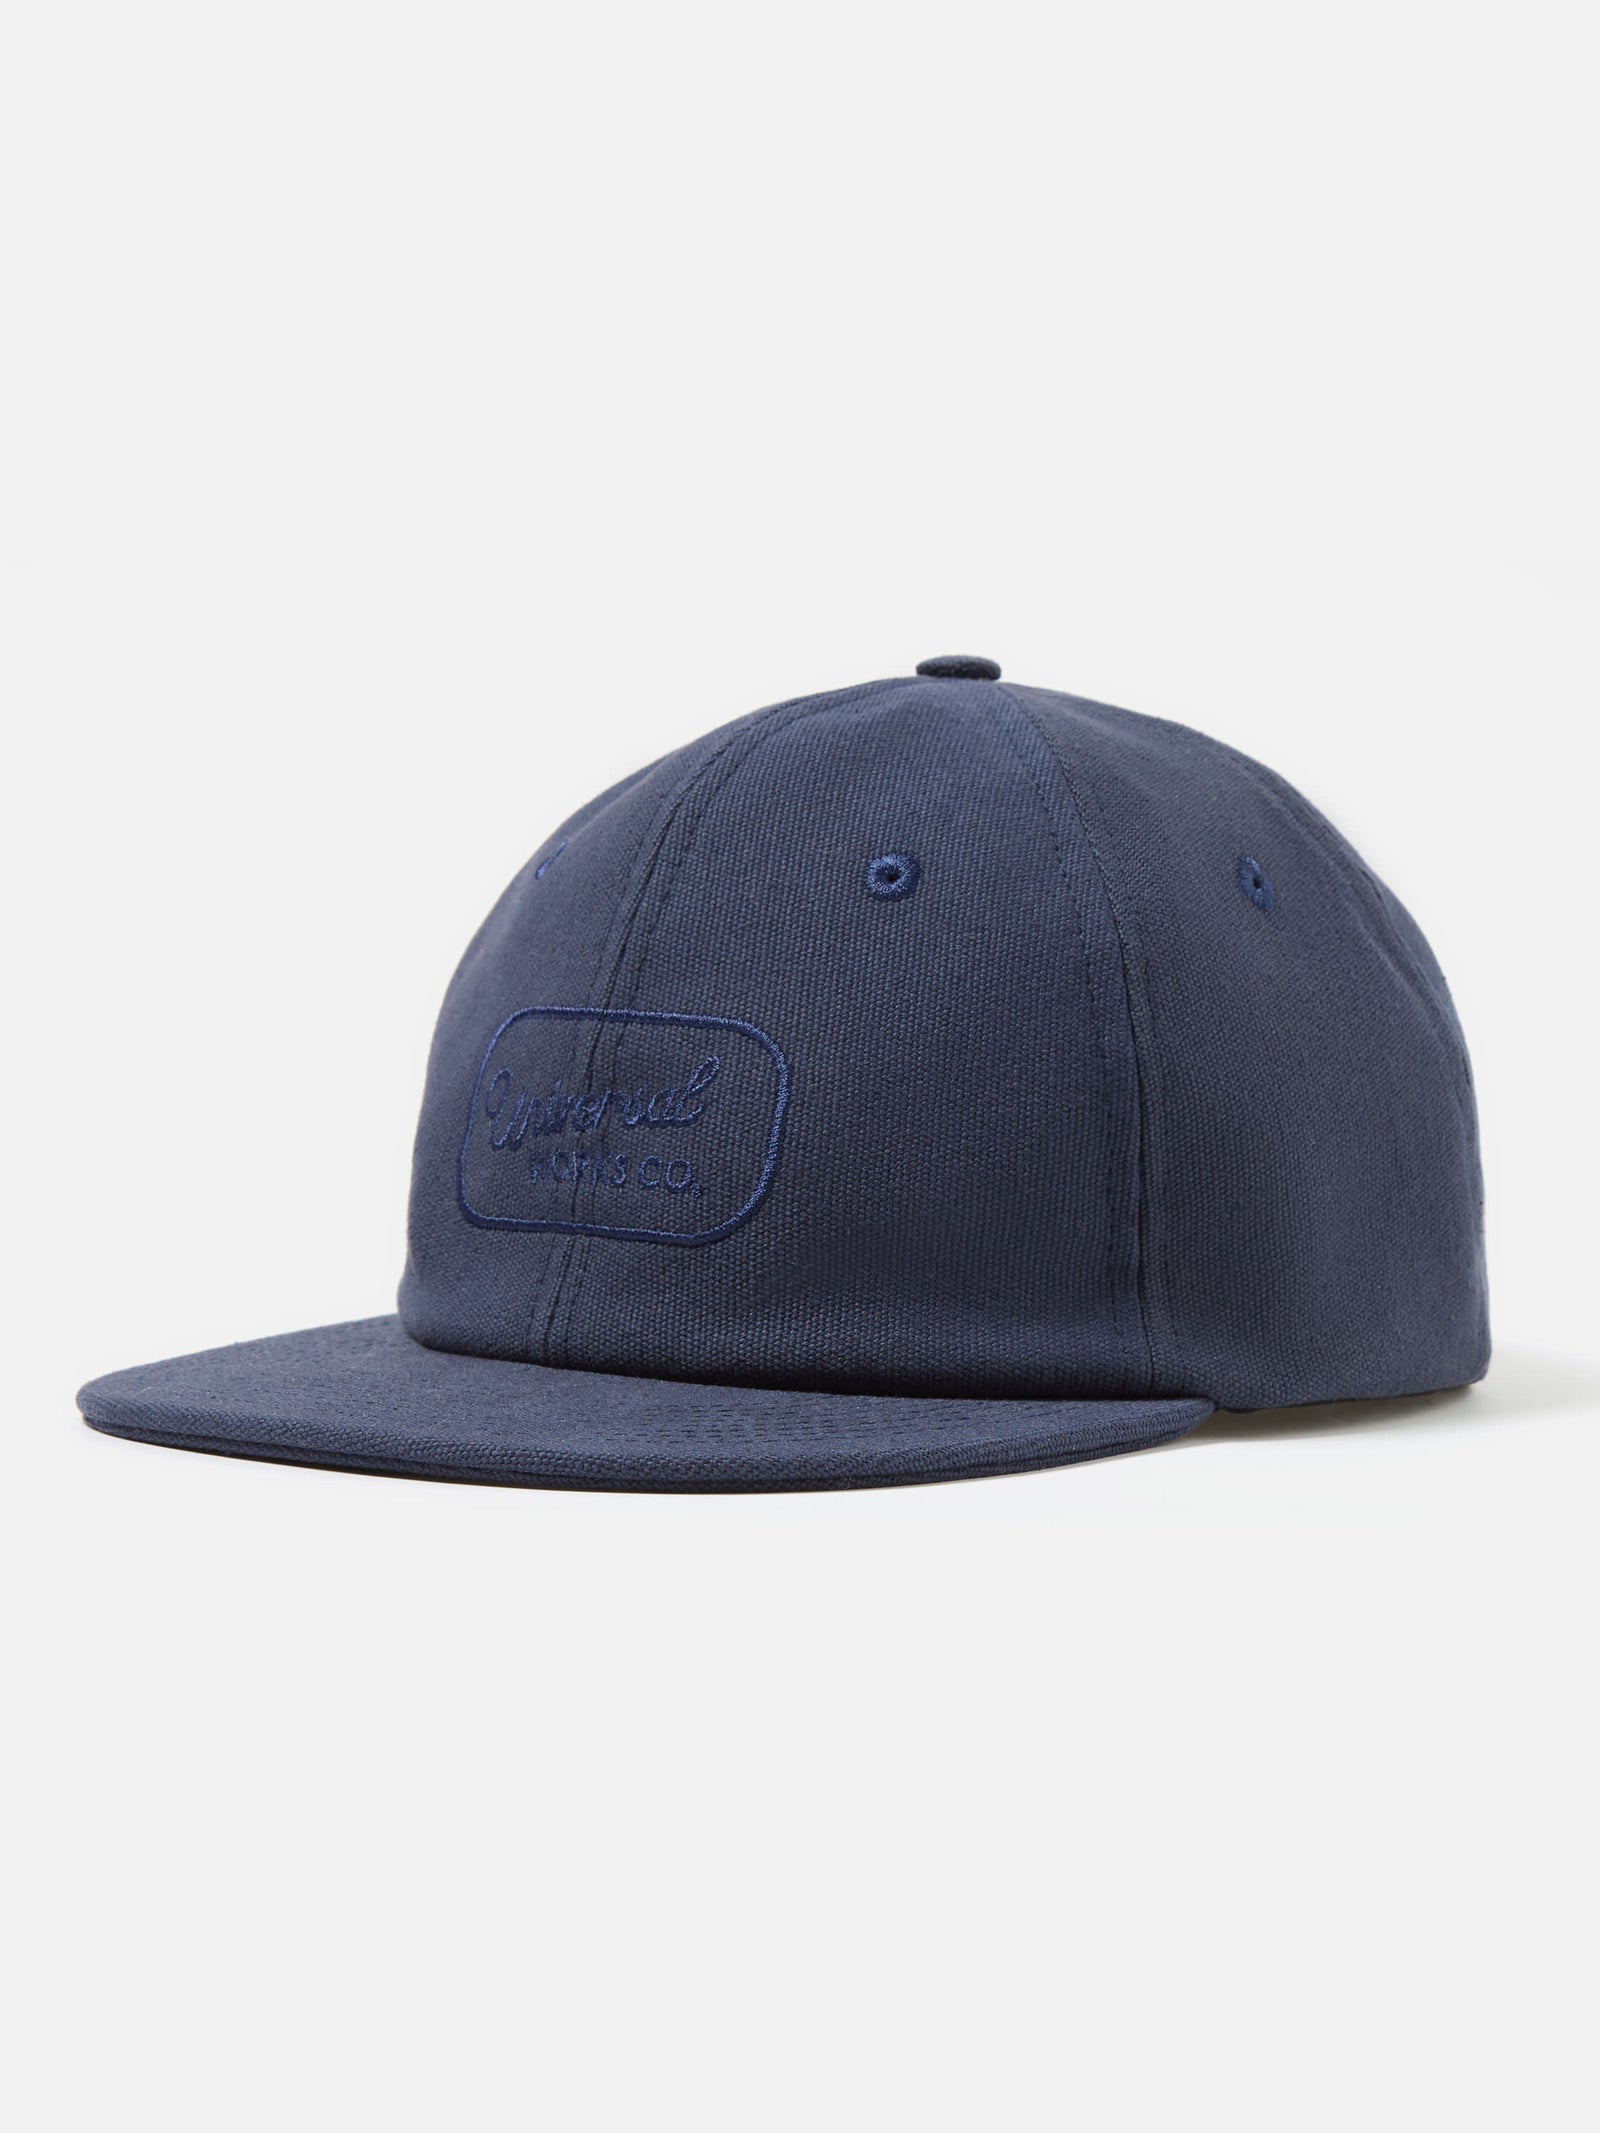 Universal Works Baseball Hat in Navy Canvas